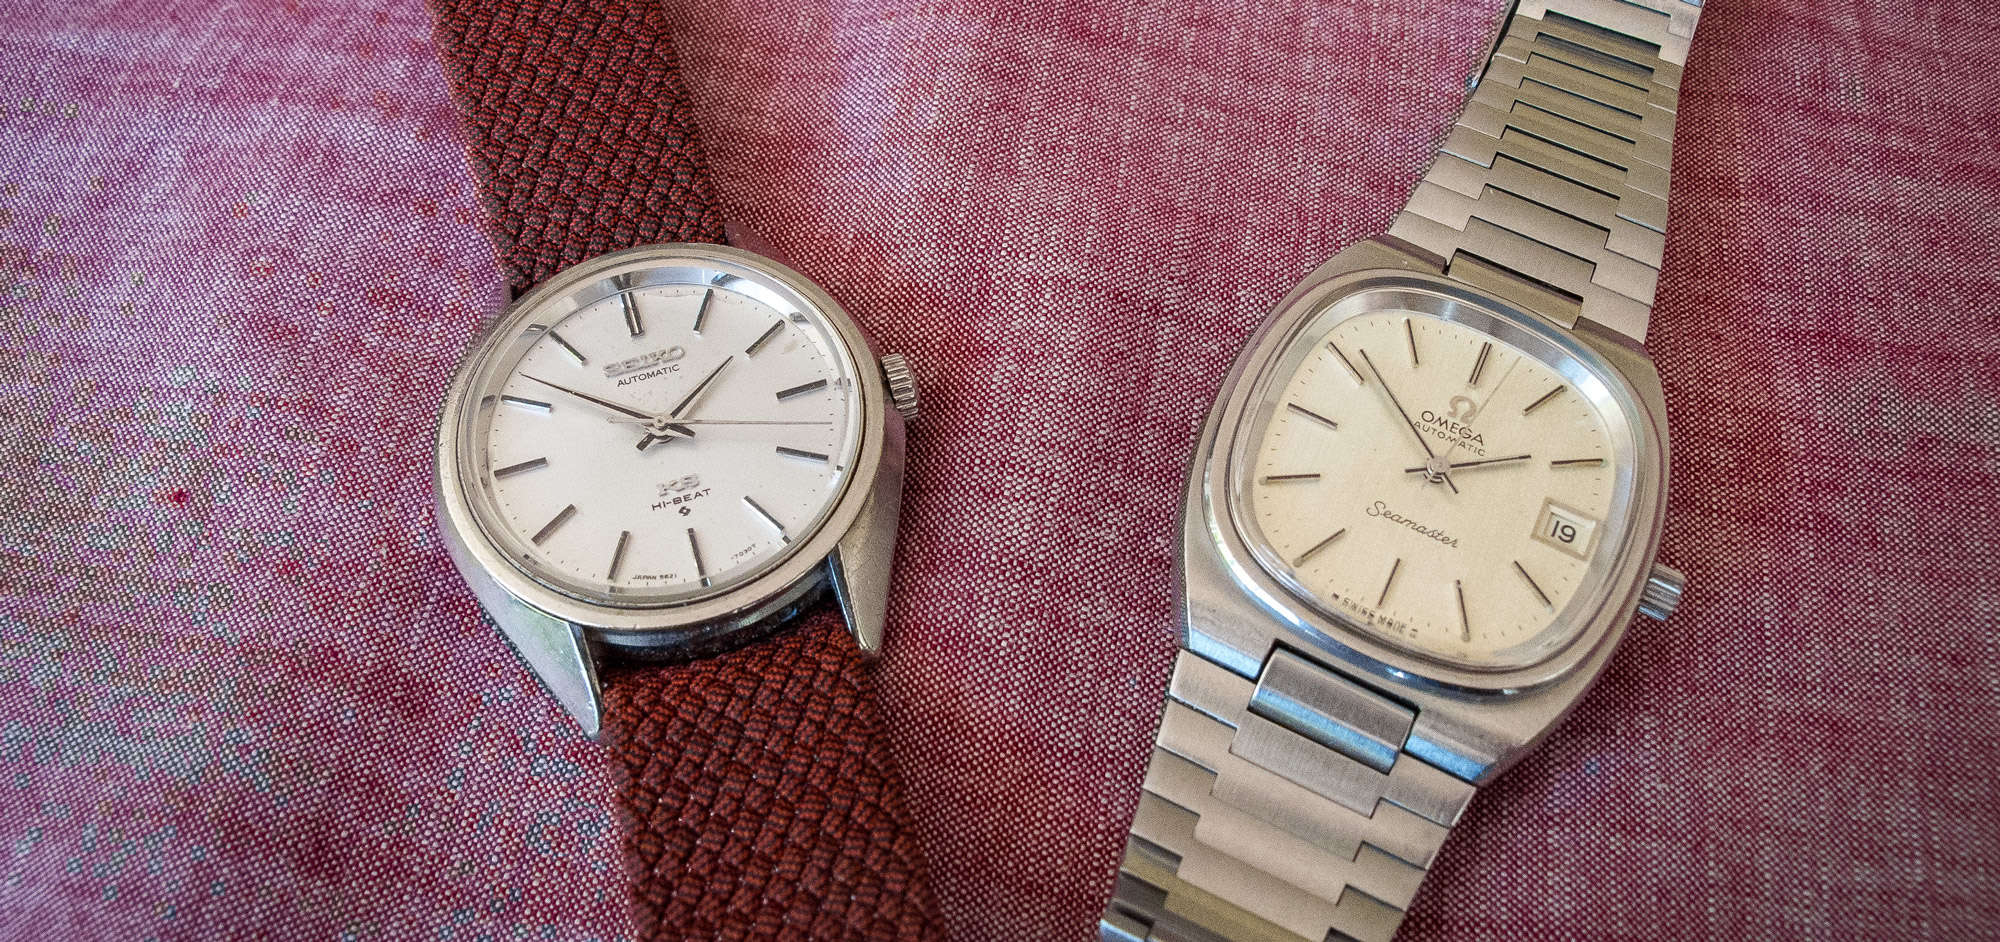 Affordable Vintage: Head-to-Head With the Omega Seamaster ref.  and  King Seiko ref. 5621-7030 - Worn & Wound